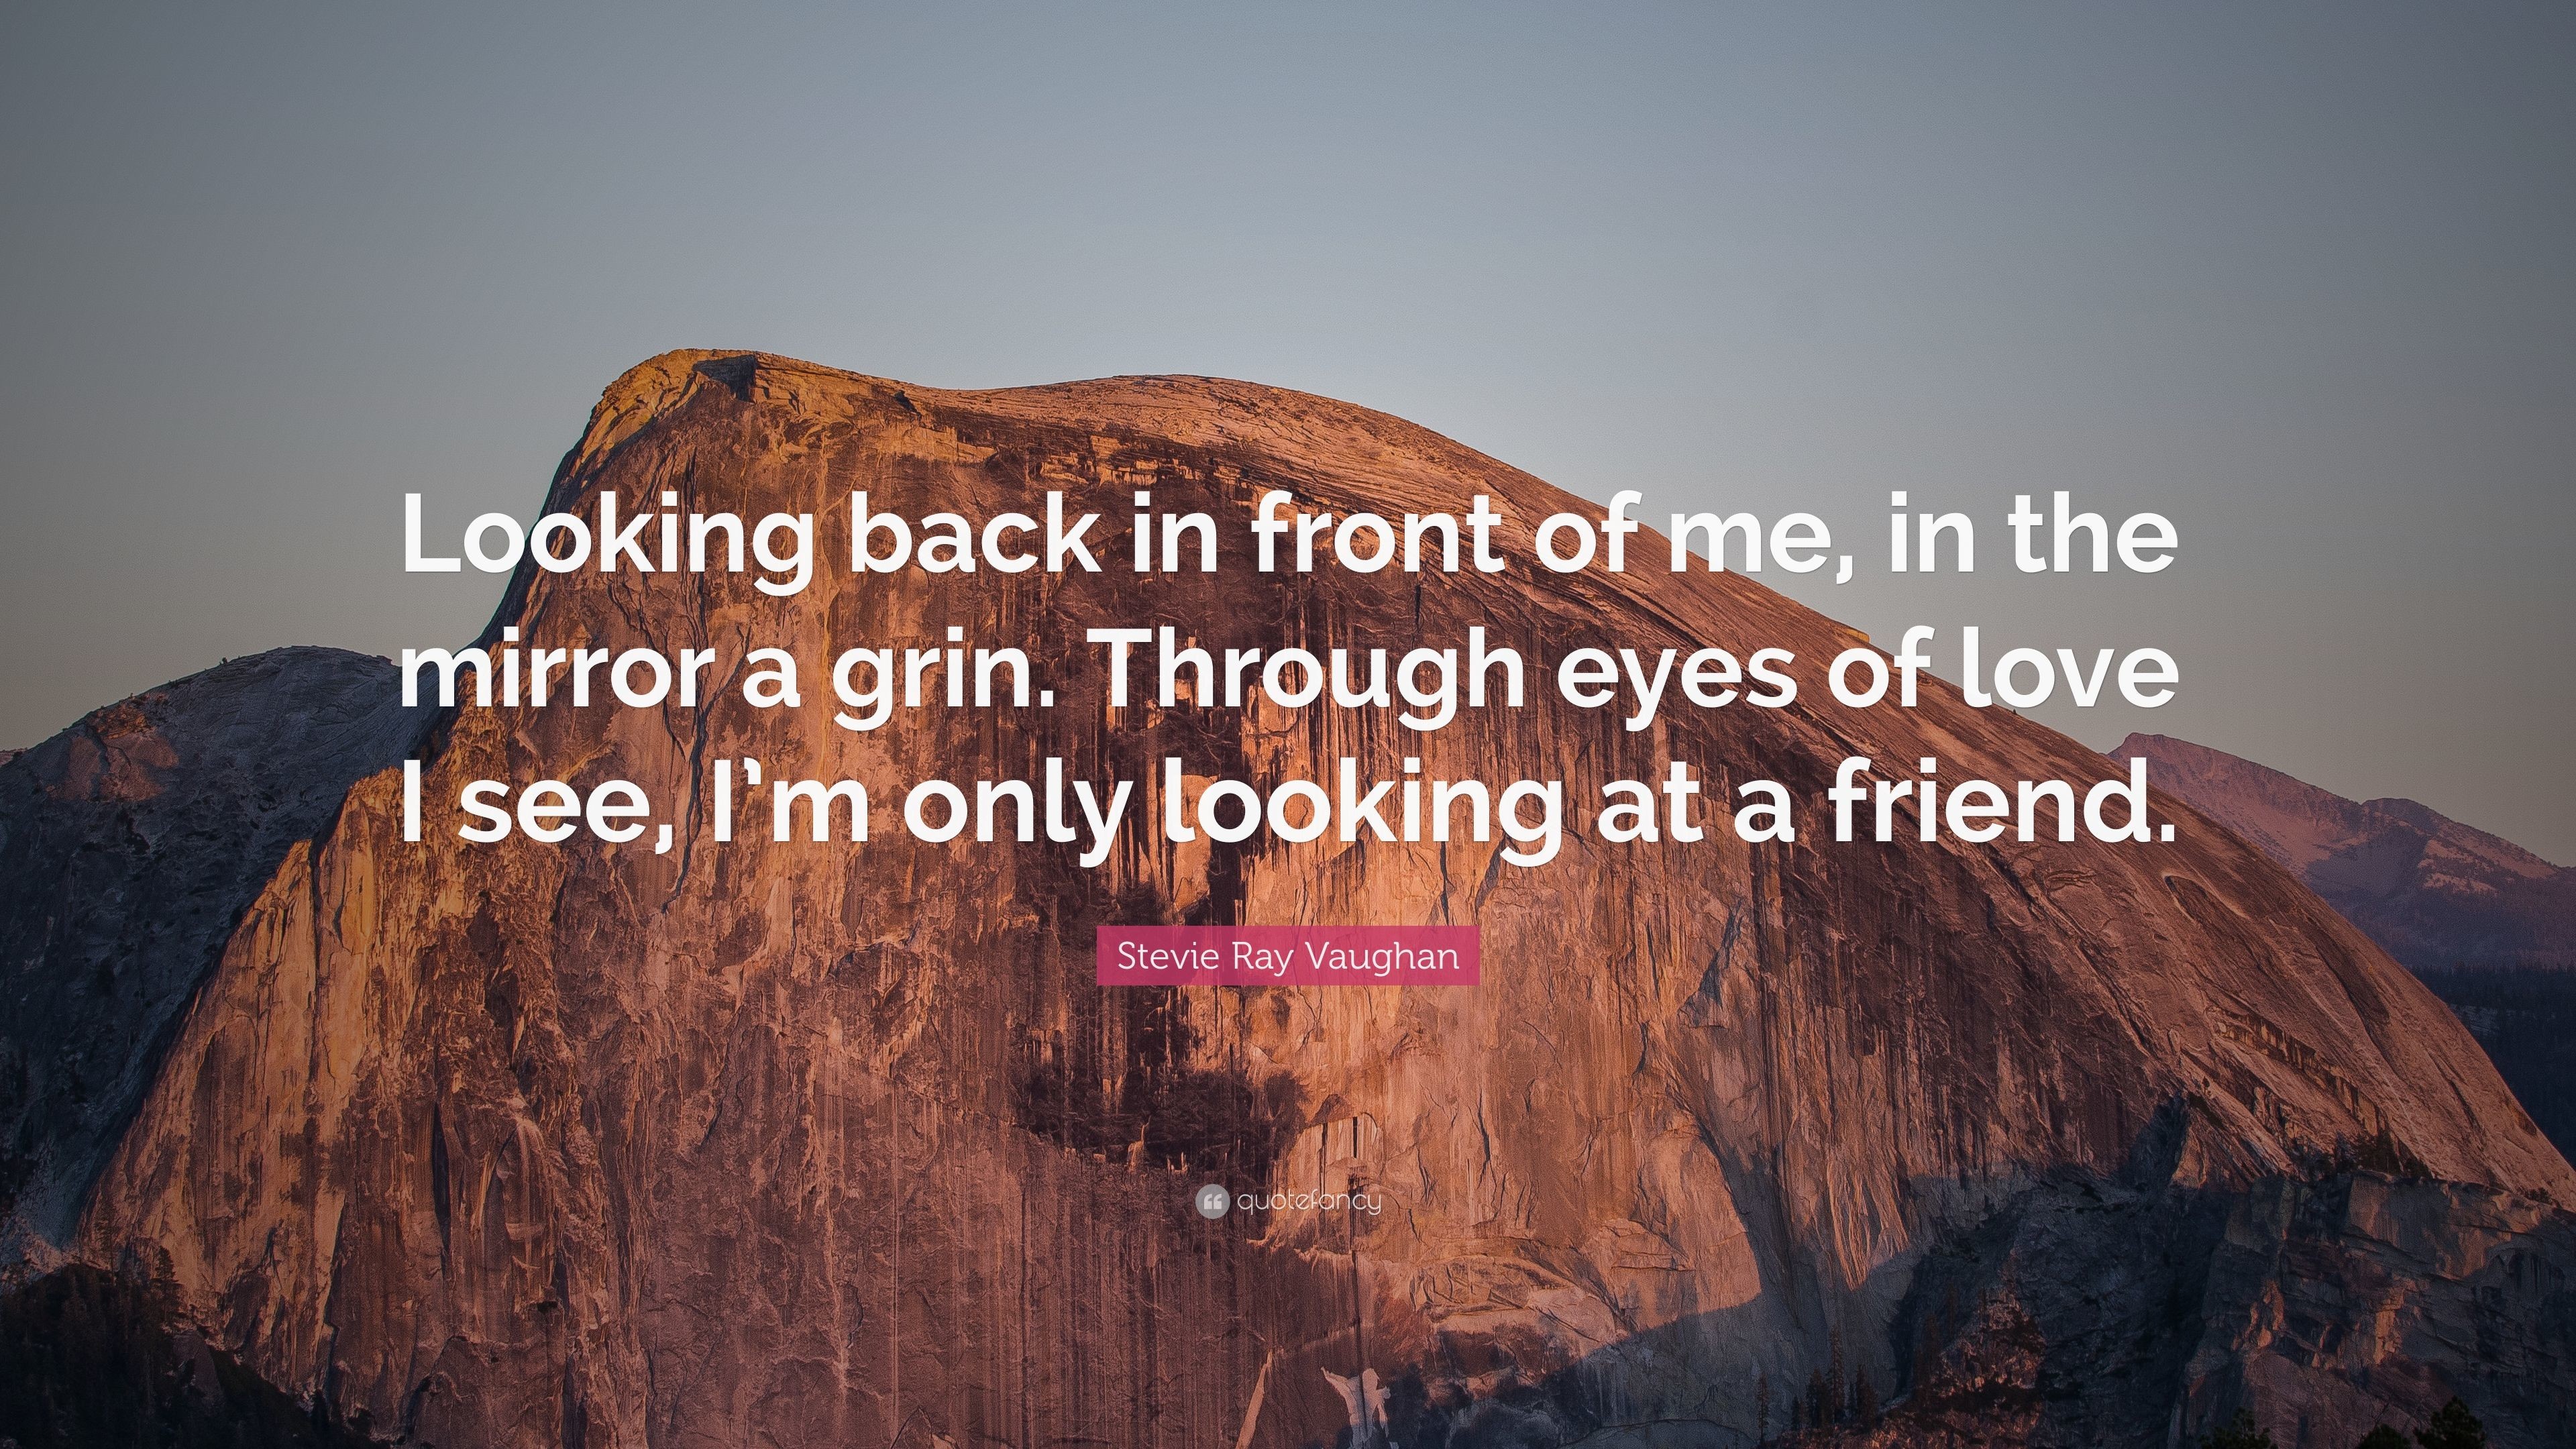 3840x2160 Stevie Ray Vaughan Quote: “Looking back in front of me, in the mirror